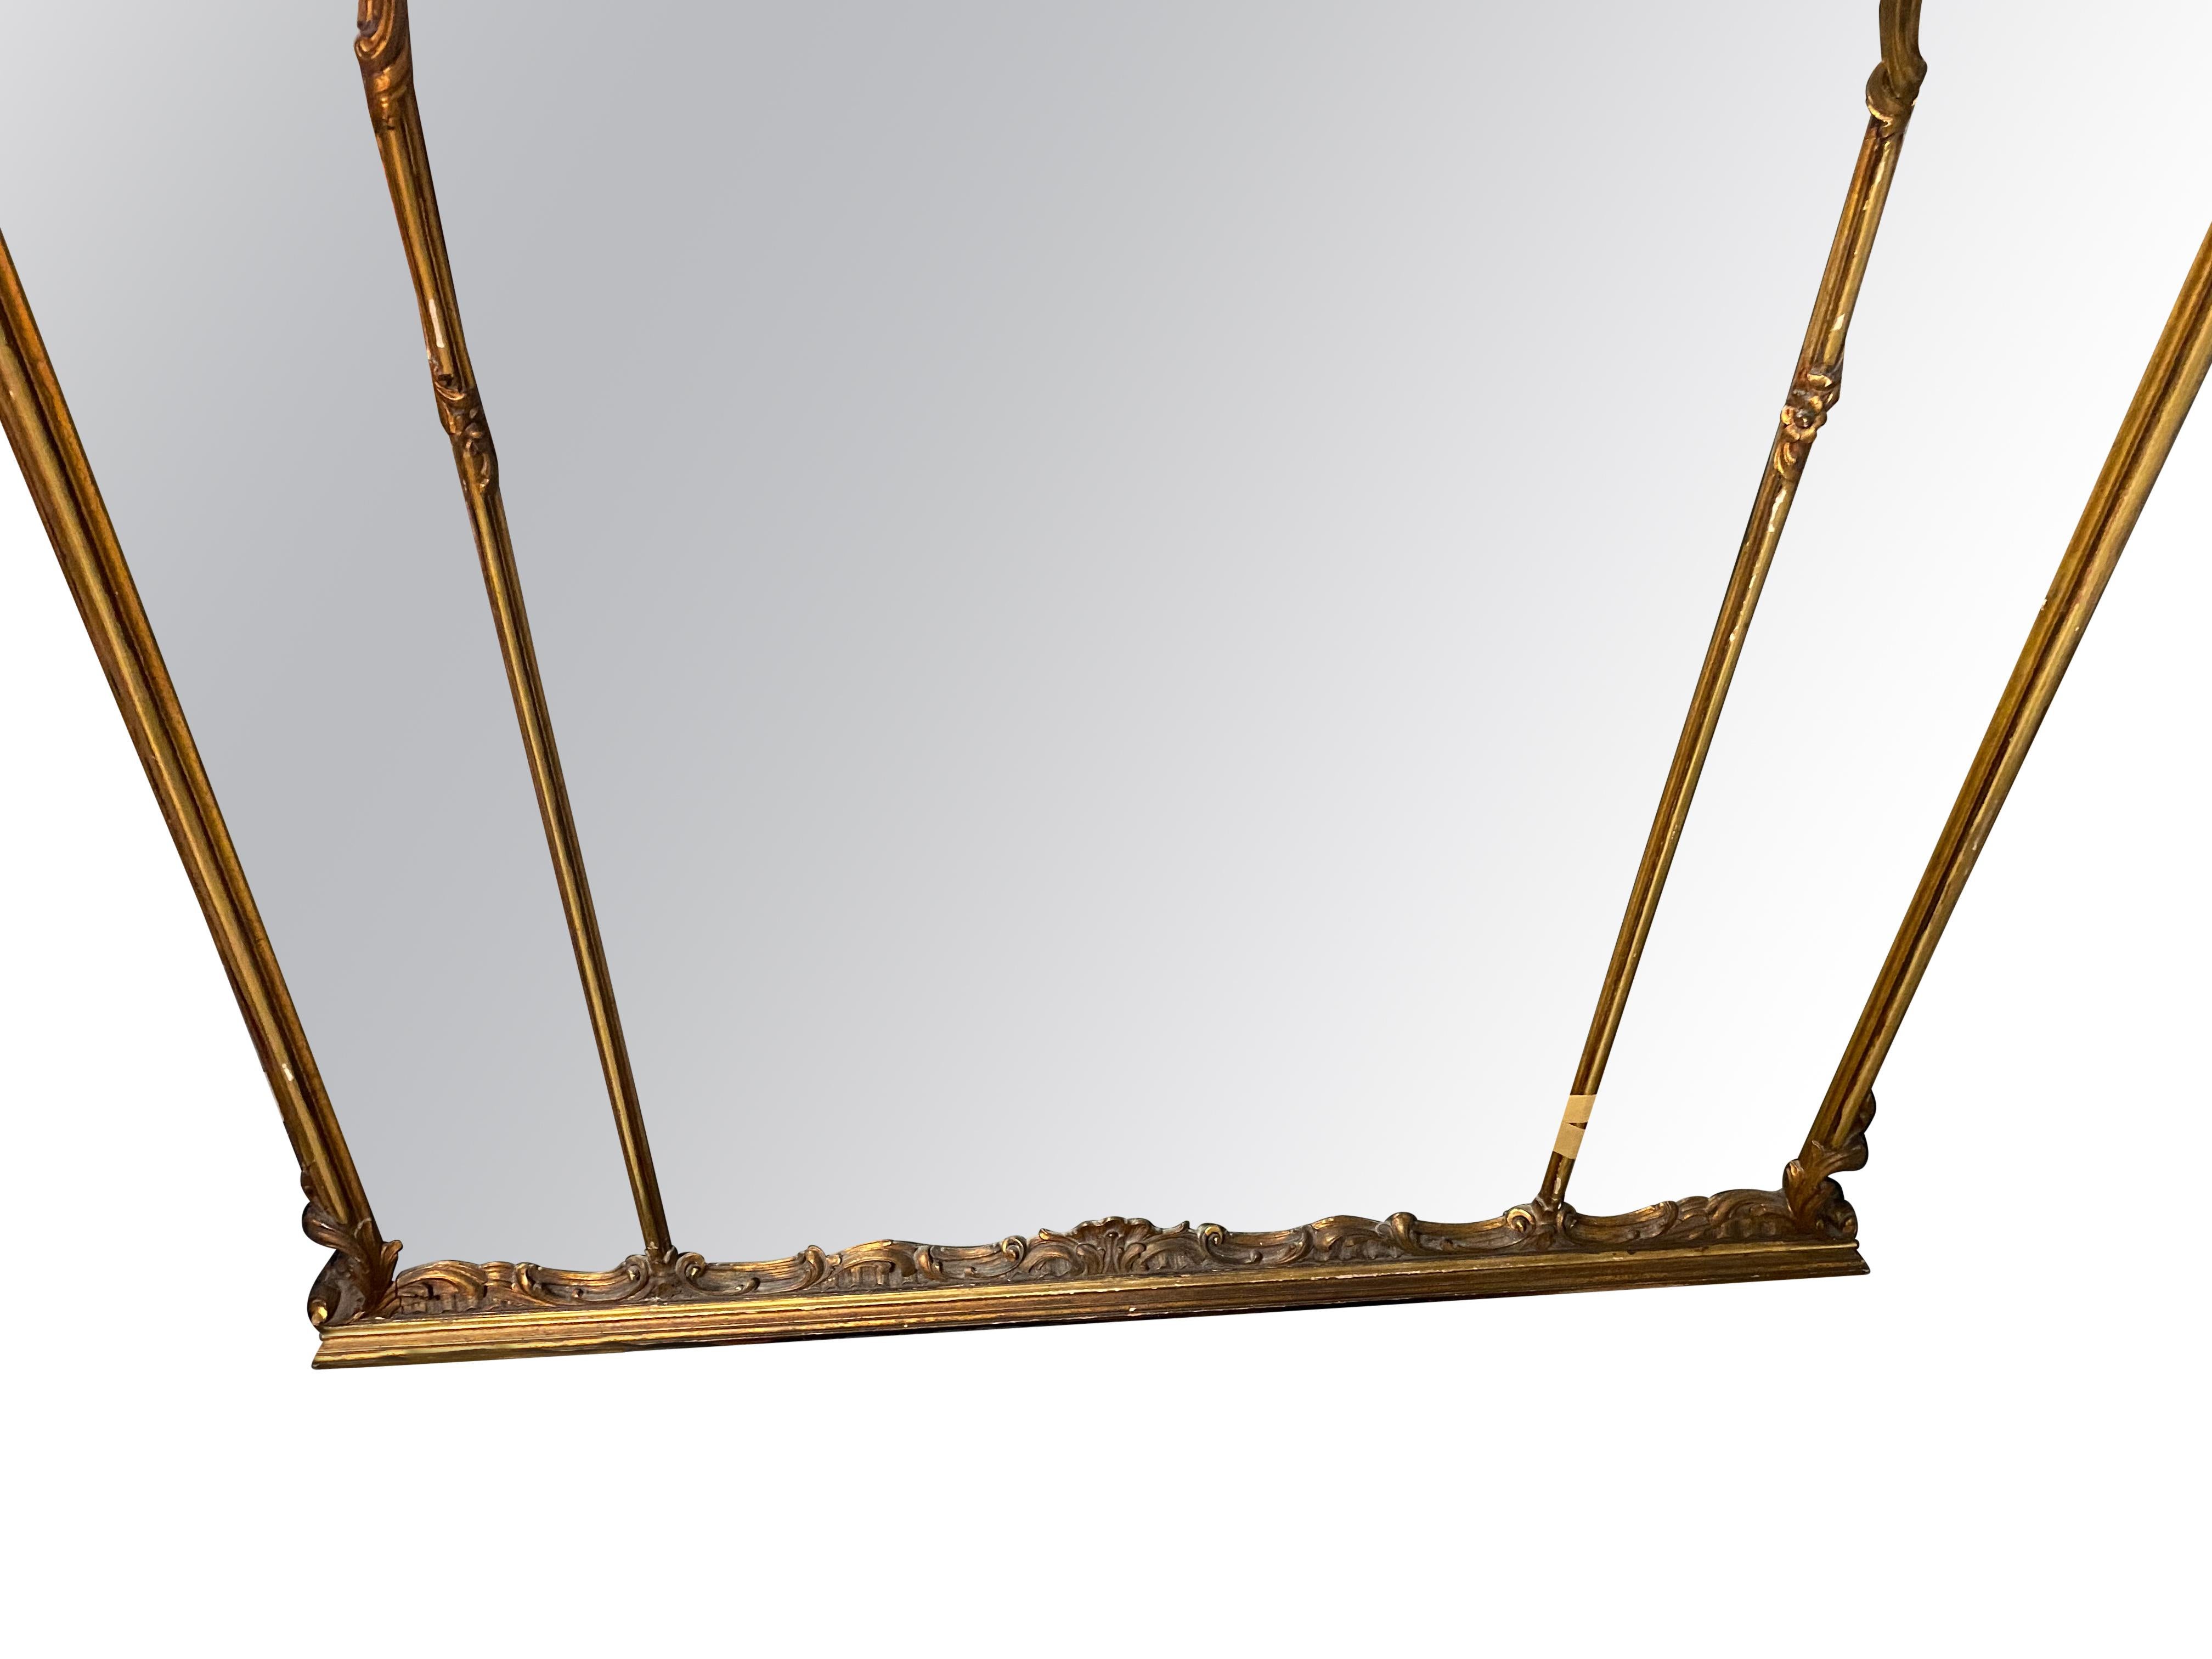 Antique, Decorative, Giltwood, Full Length Mirror  For Sale 5